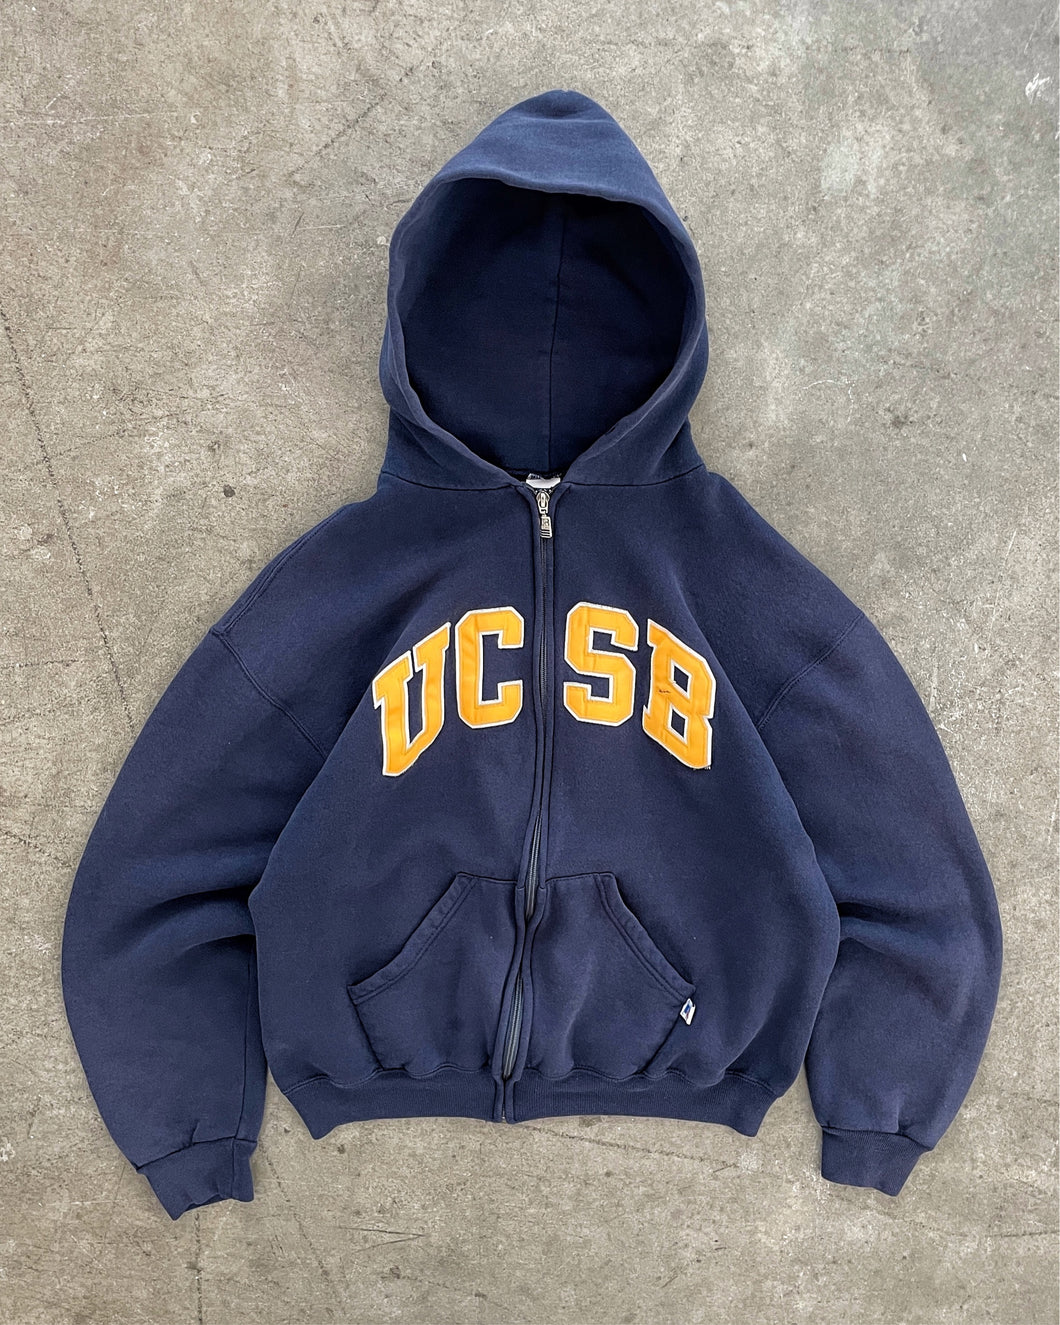 FADED NAVY BLUE “UCSB” RUSSELL ZIP UP HOODIE - 1990S